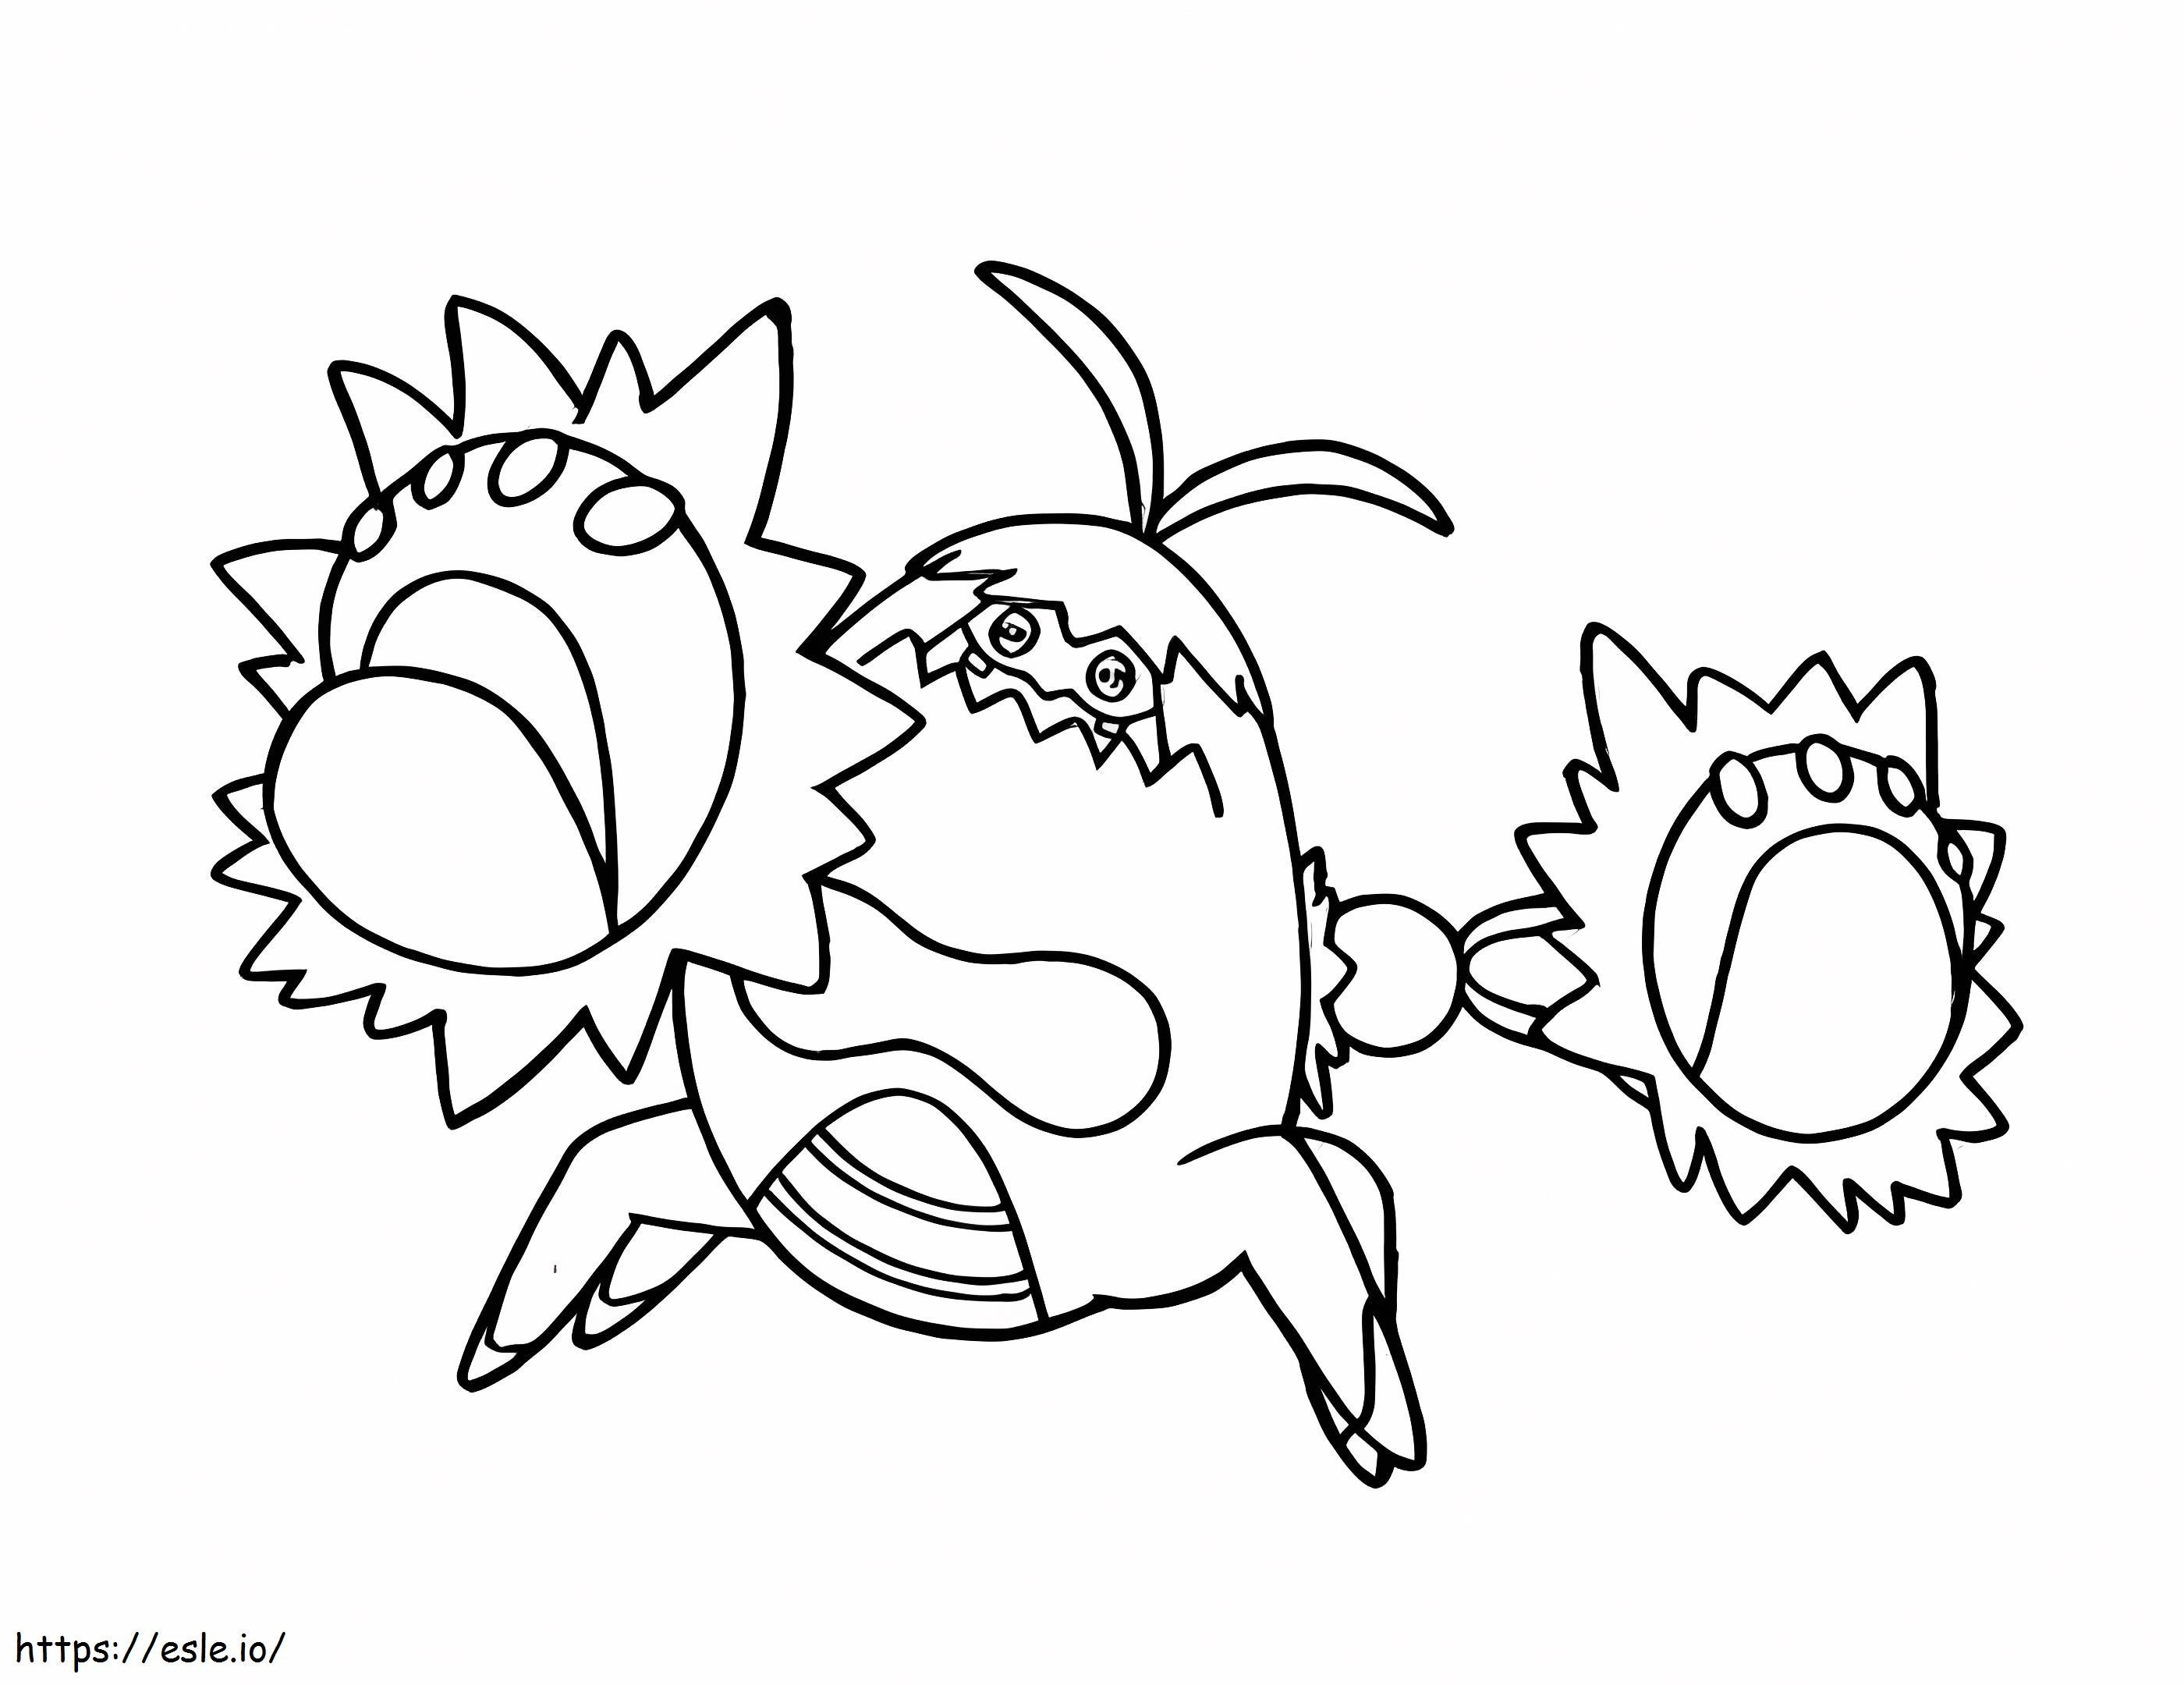 Crabominable Pokemon 2 coloring page